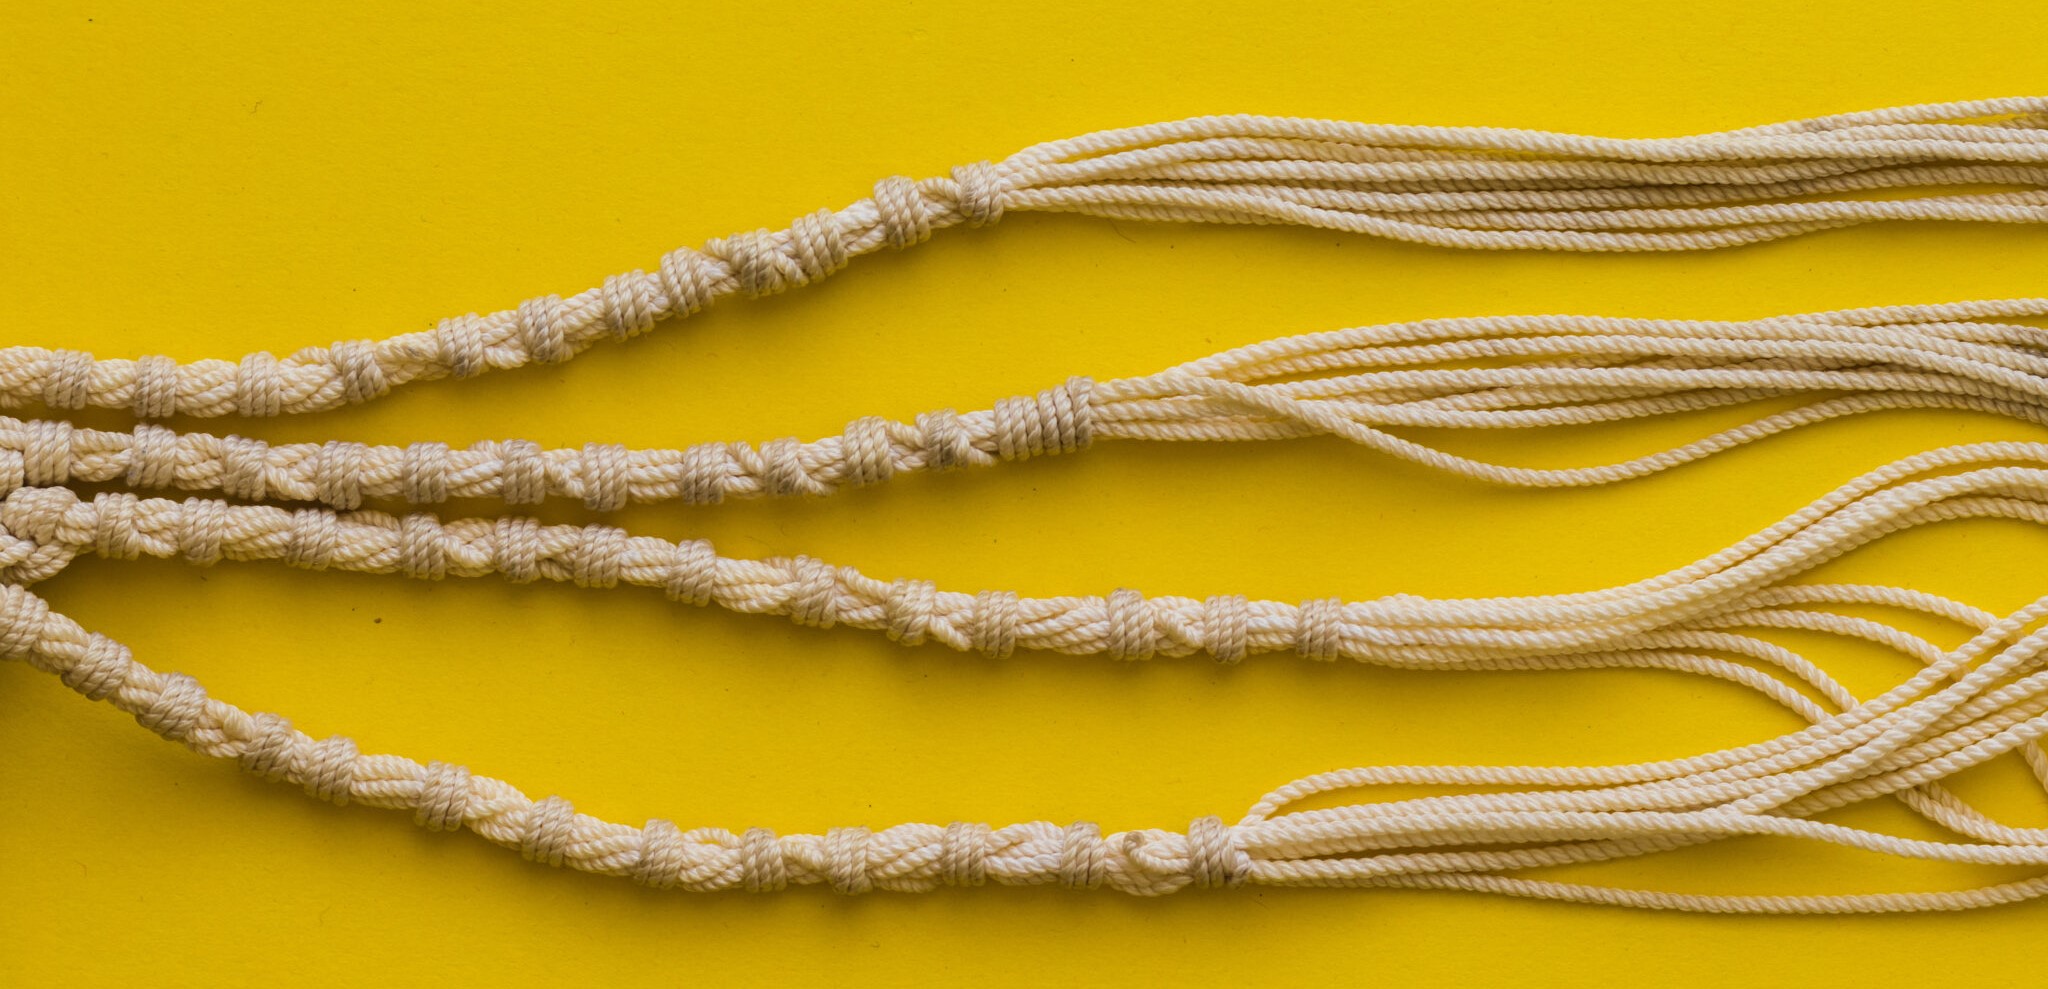 Tallit threads made of sheep wool, yellow background